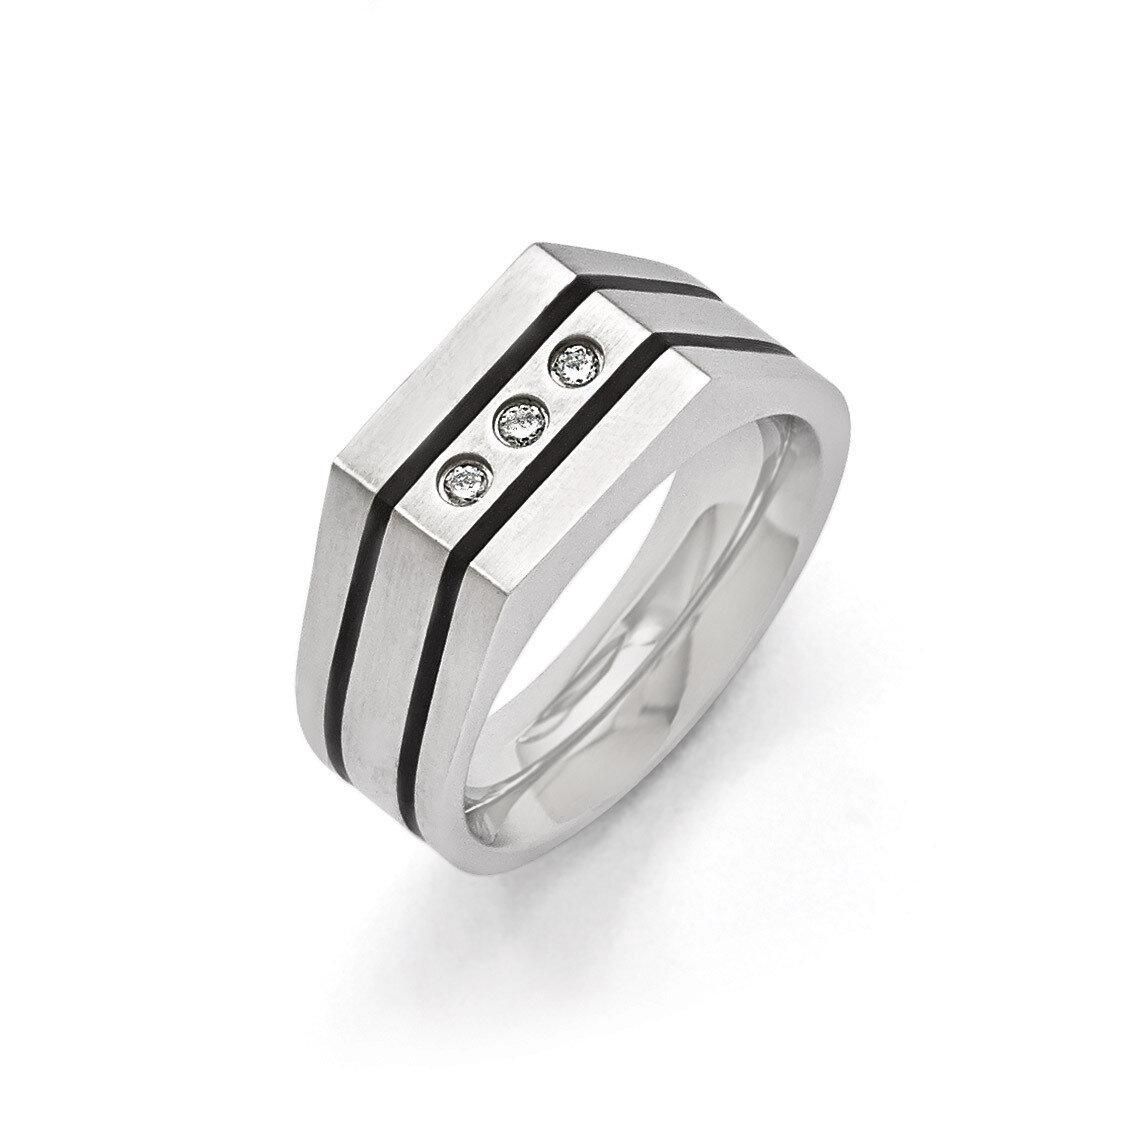 Brushed Black IP-plated Synthetic Diamonds Ring - Stainless Steel SR397